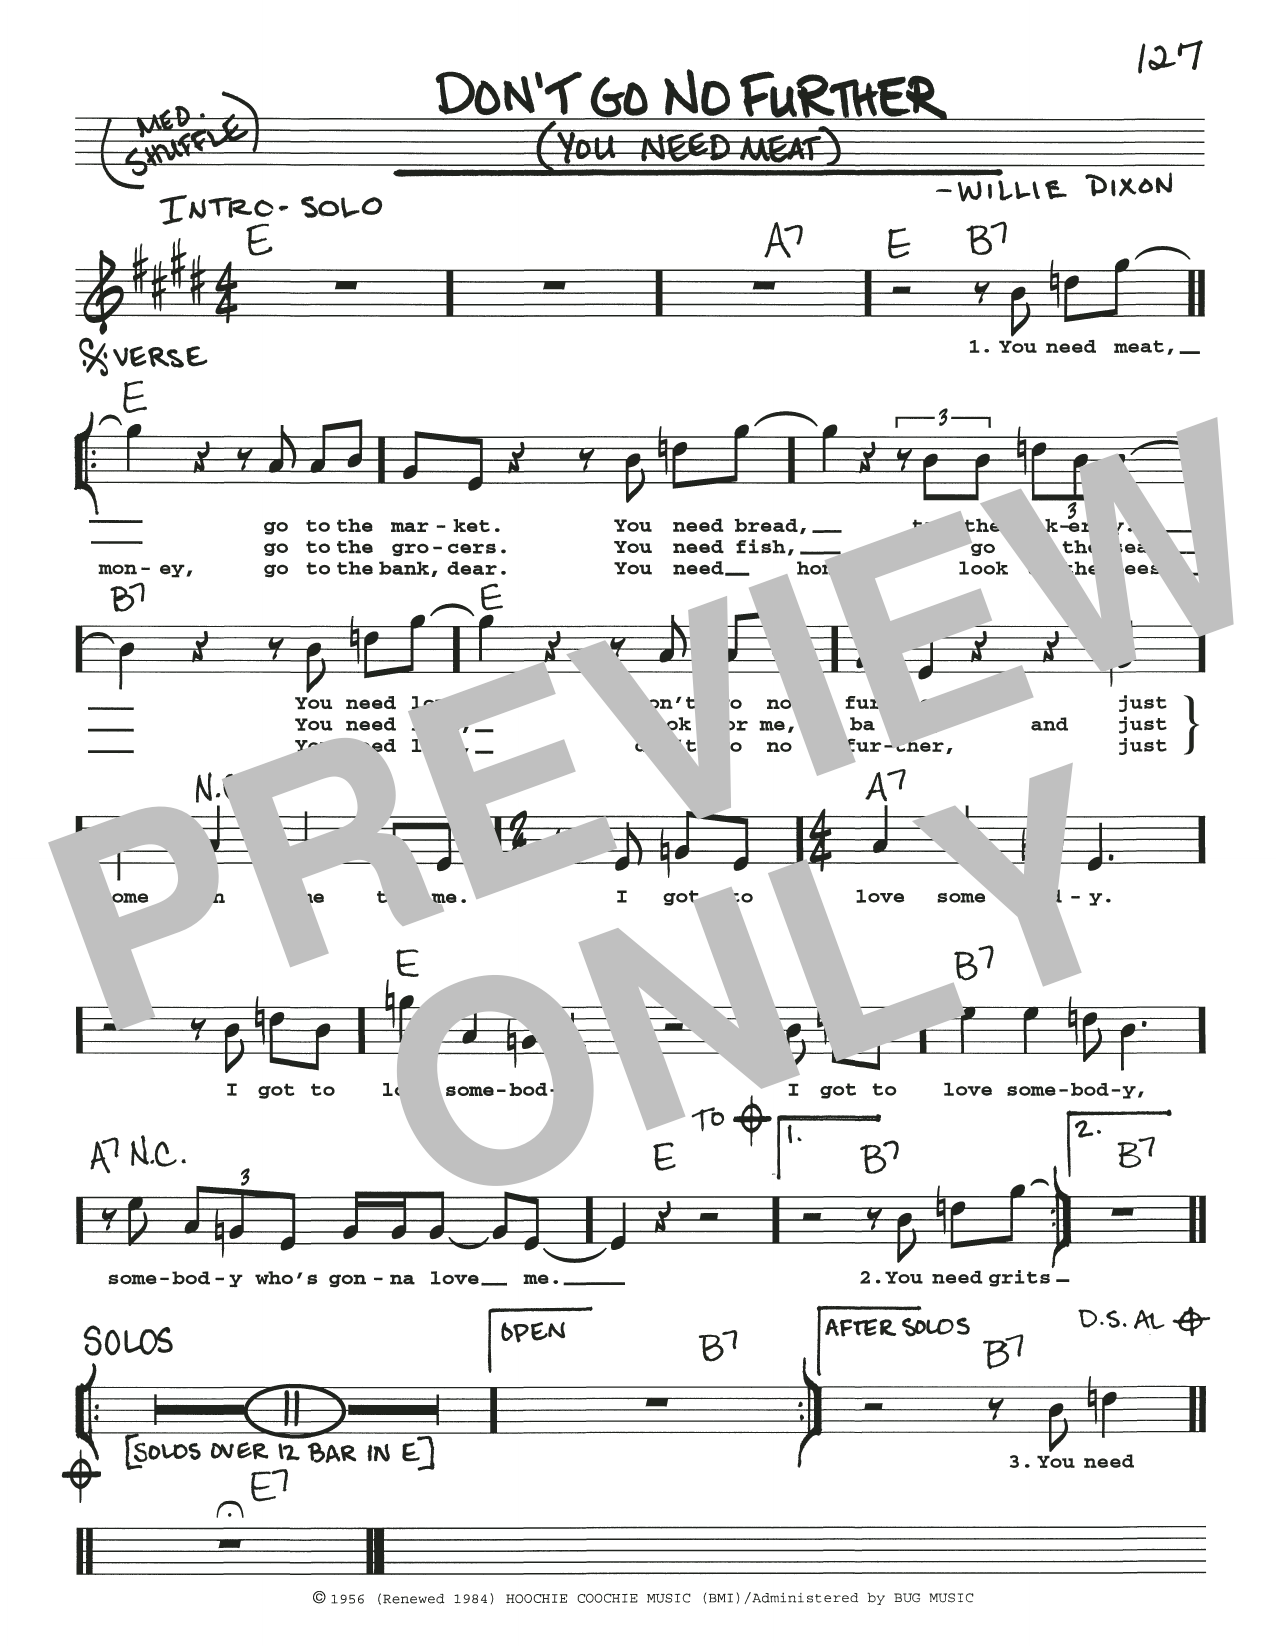 Download Willie Dixon Don't Go No Further (You Need Meat) Sheet Music